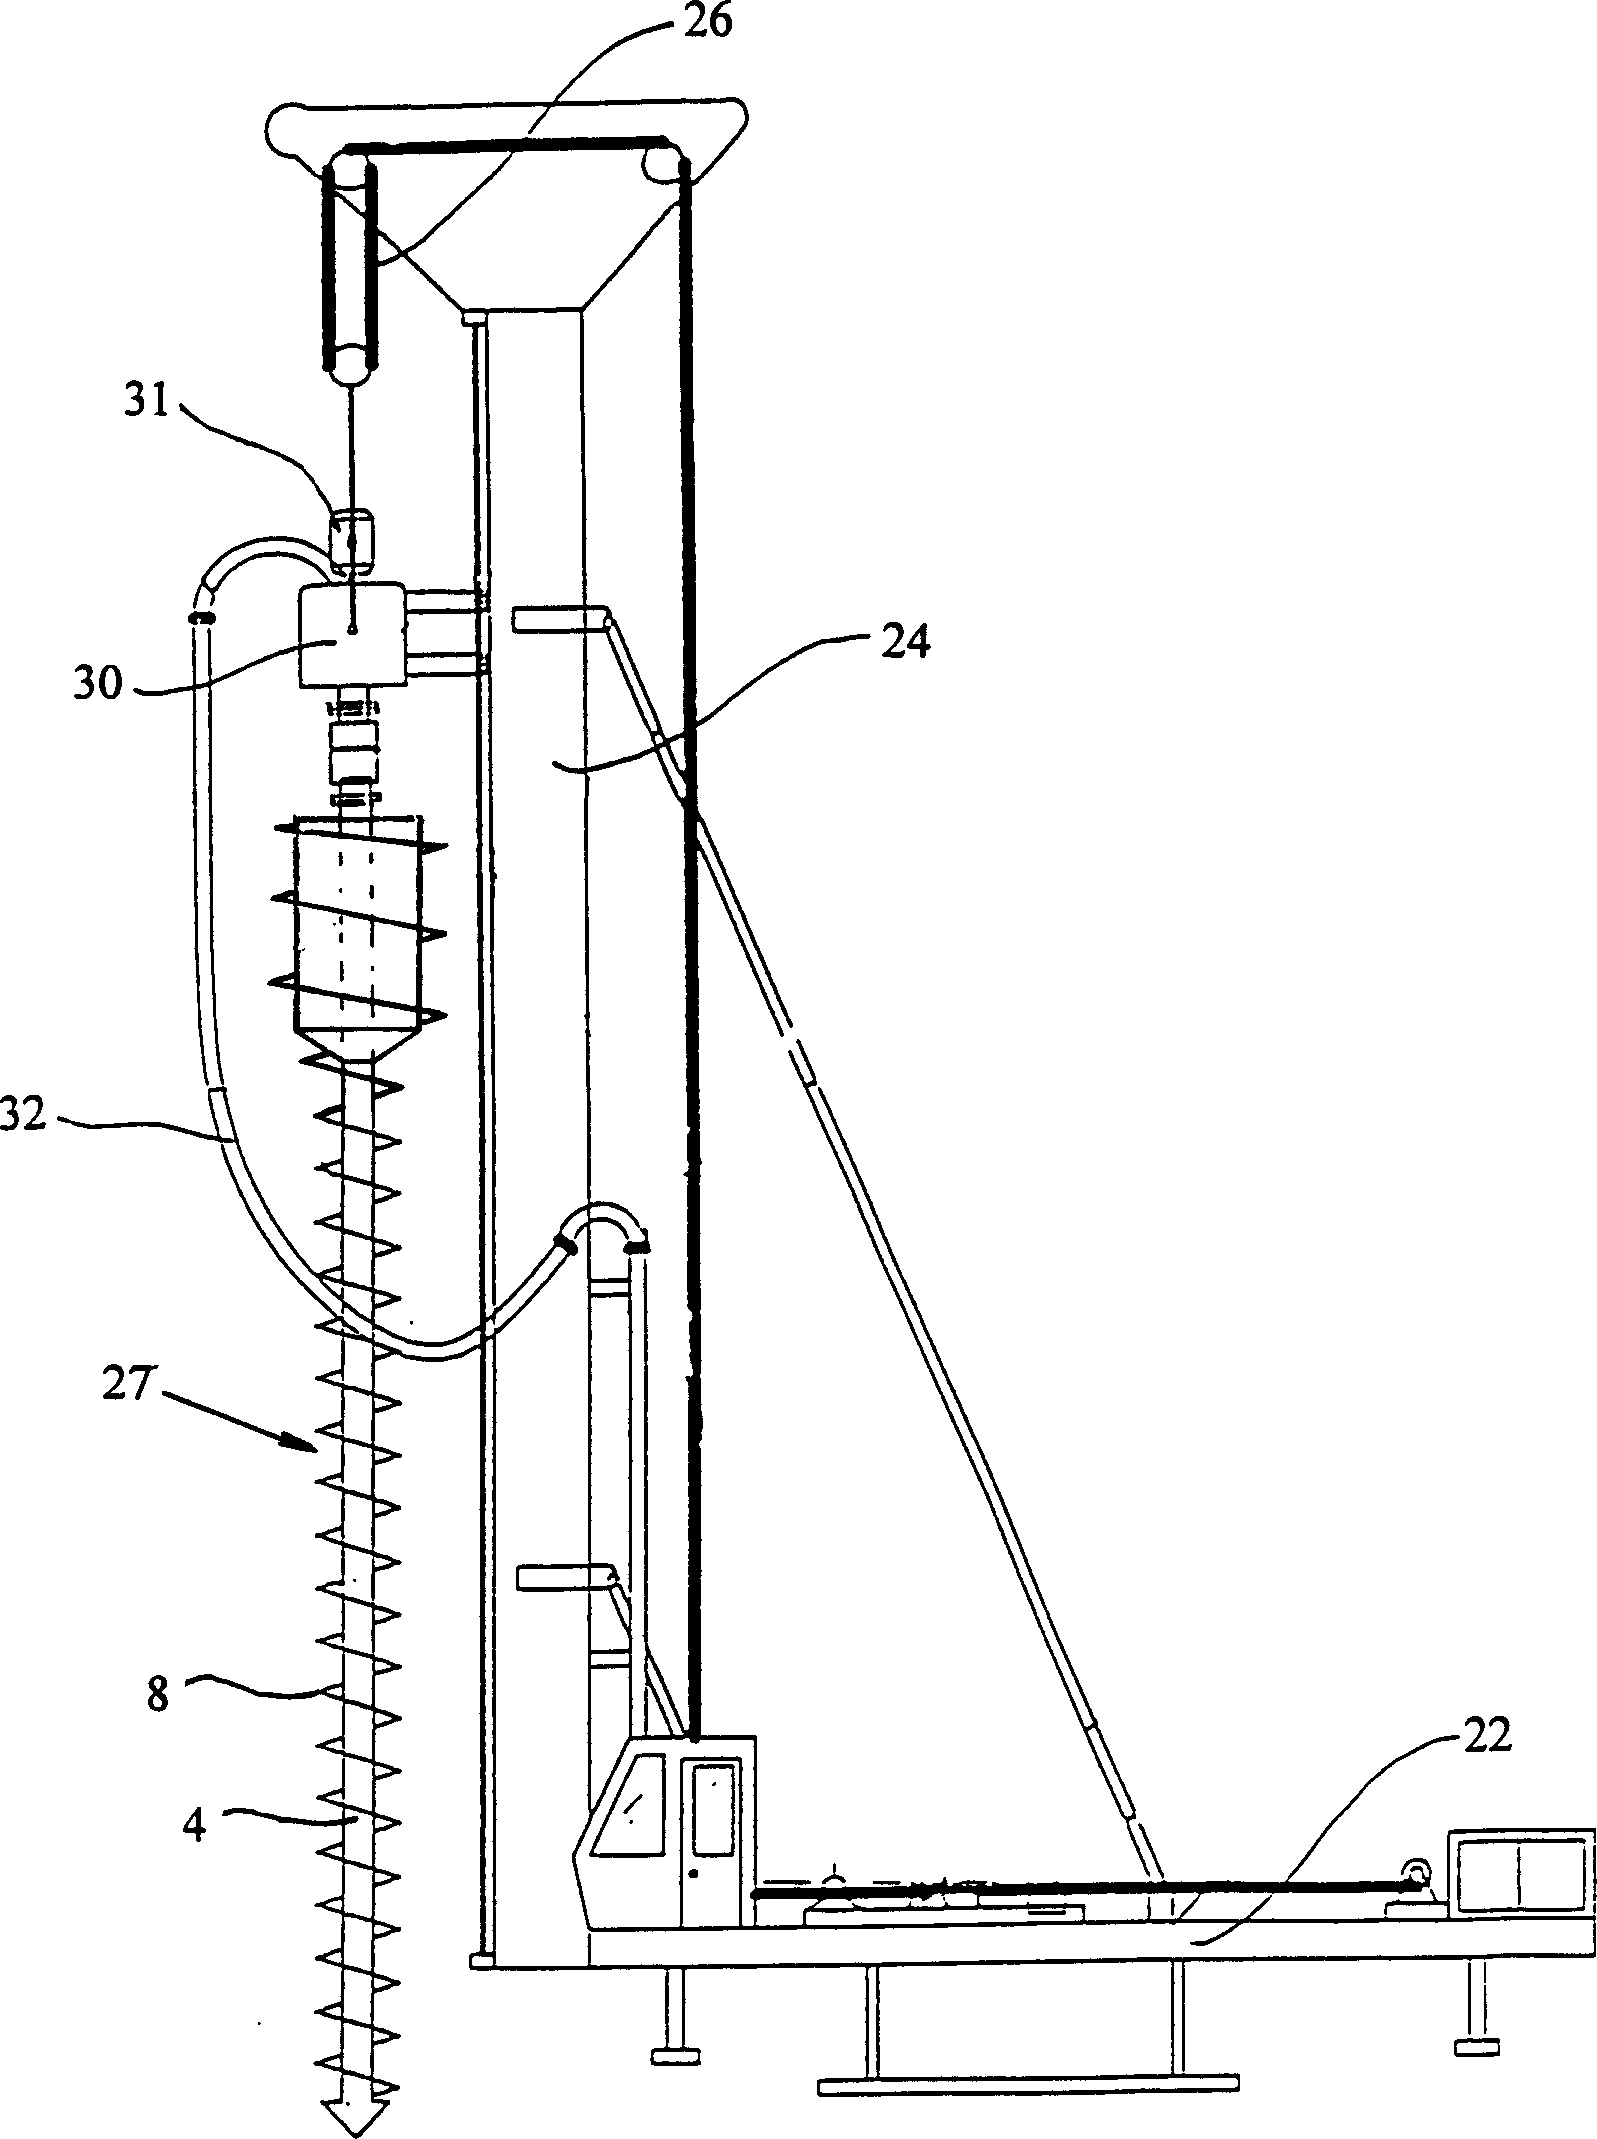 Earth auger of making concrete pile